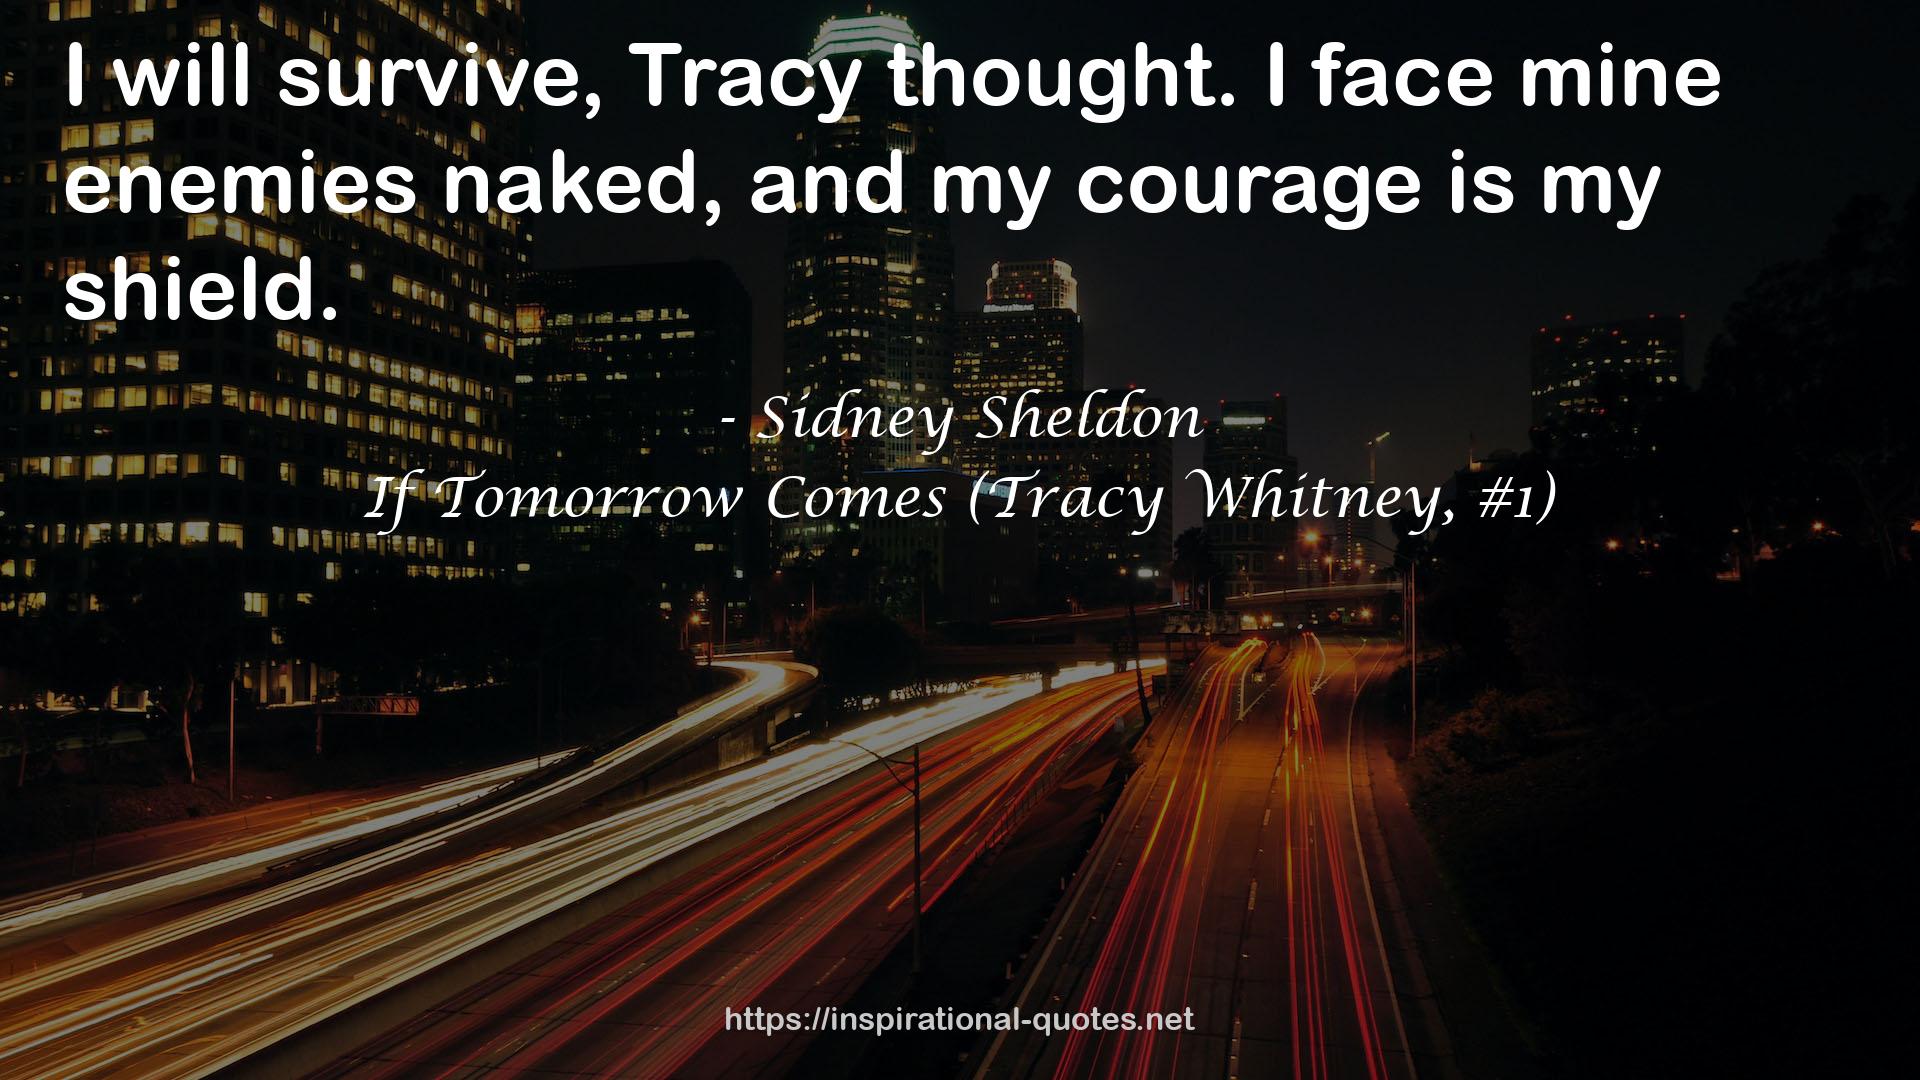 If Tomorrow Comes (Tracy Whitney, #1) QUOTES